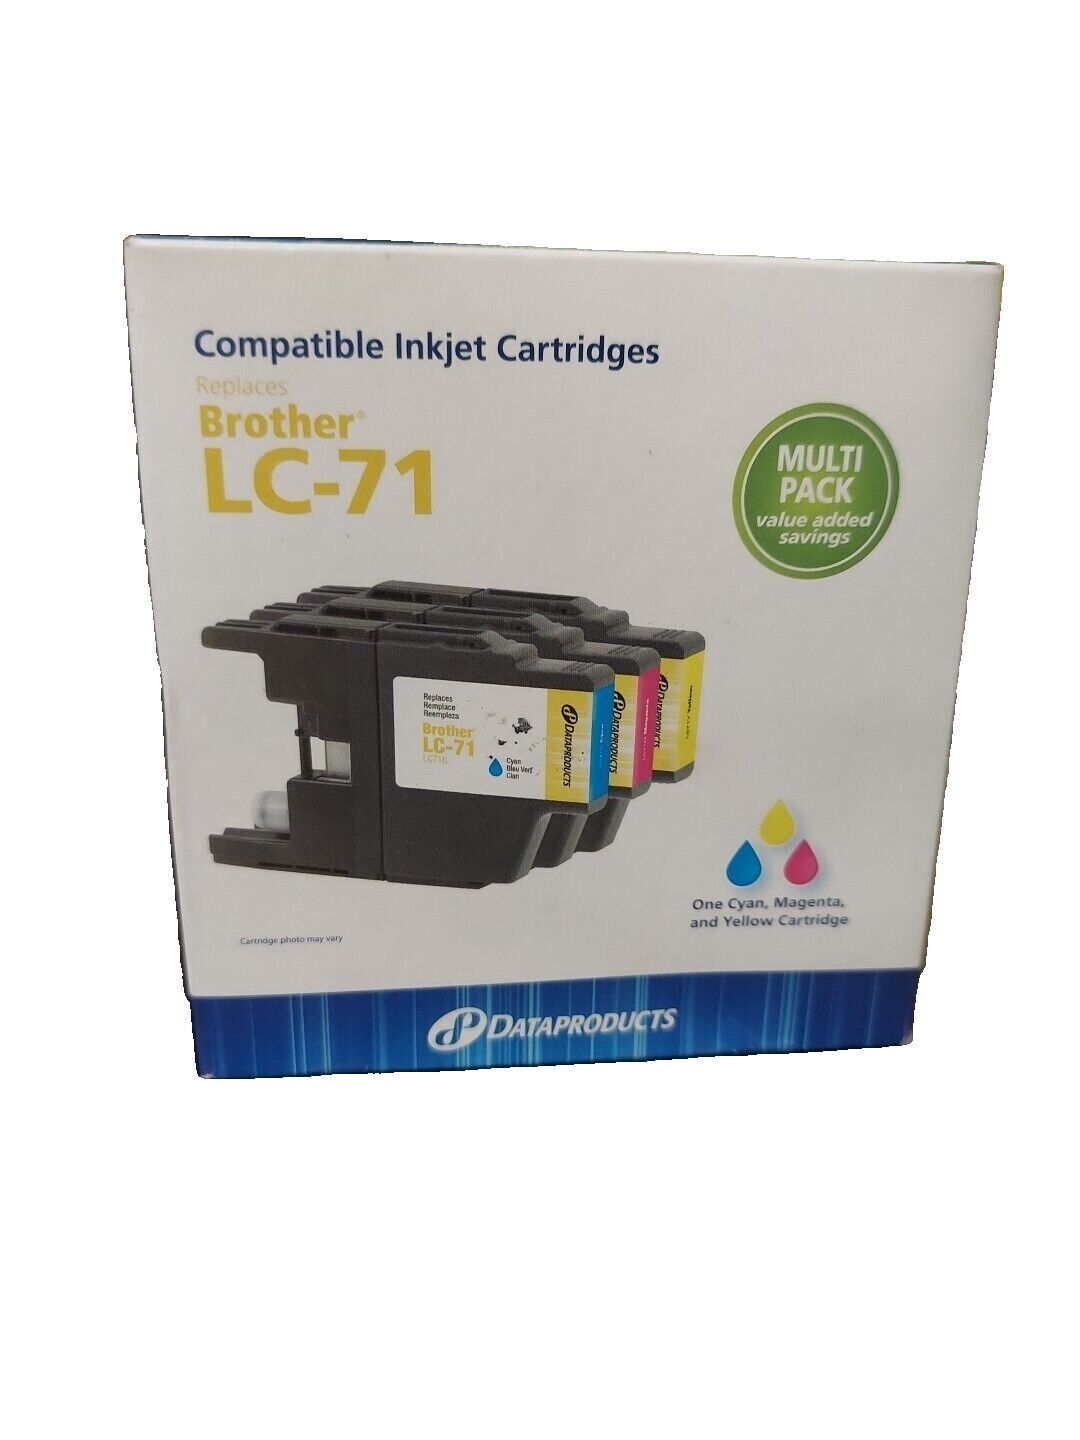 Brother LC71 replaces Dataproducts inkjet multi pack.N